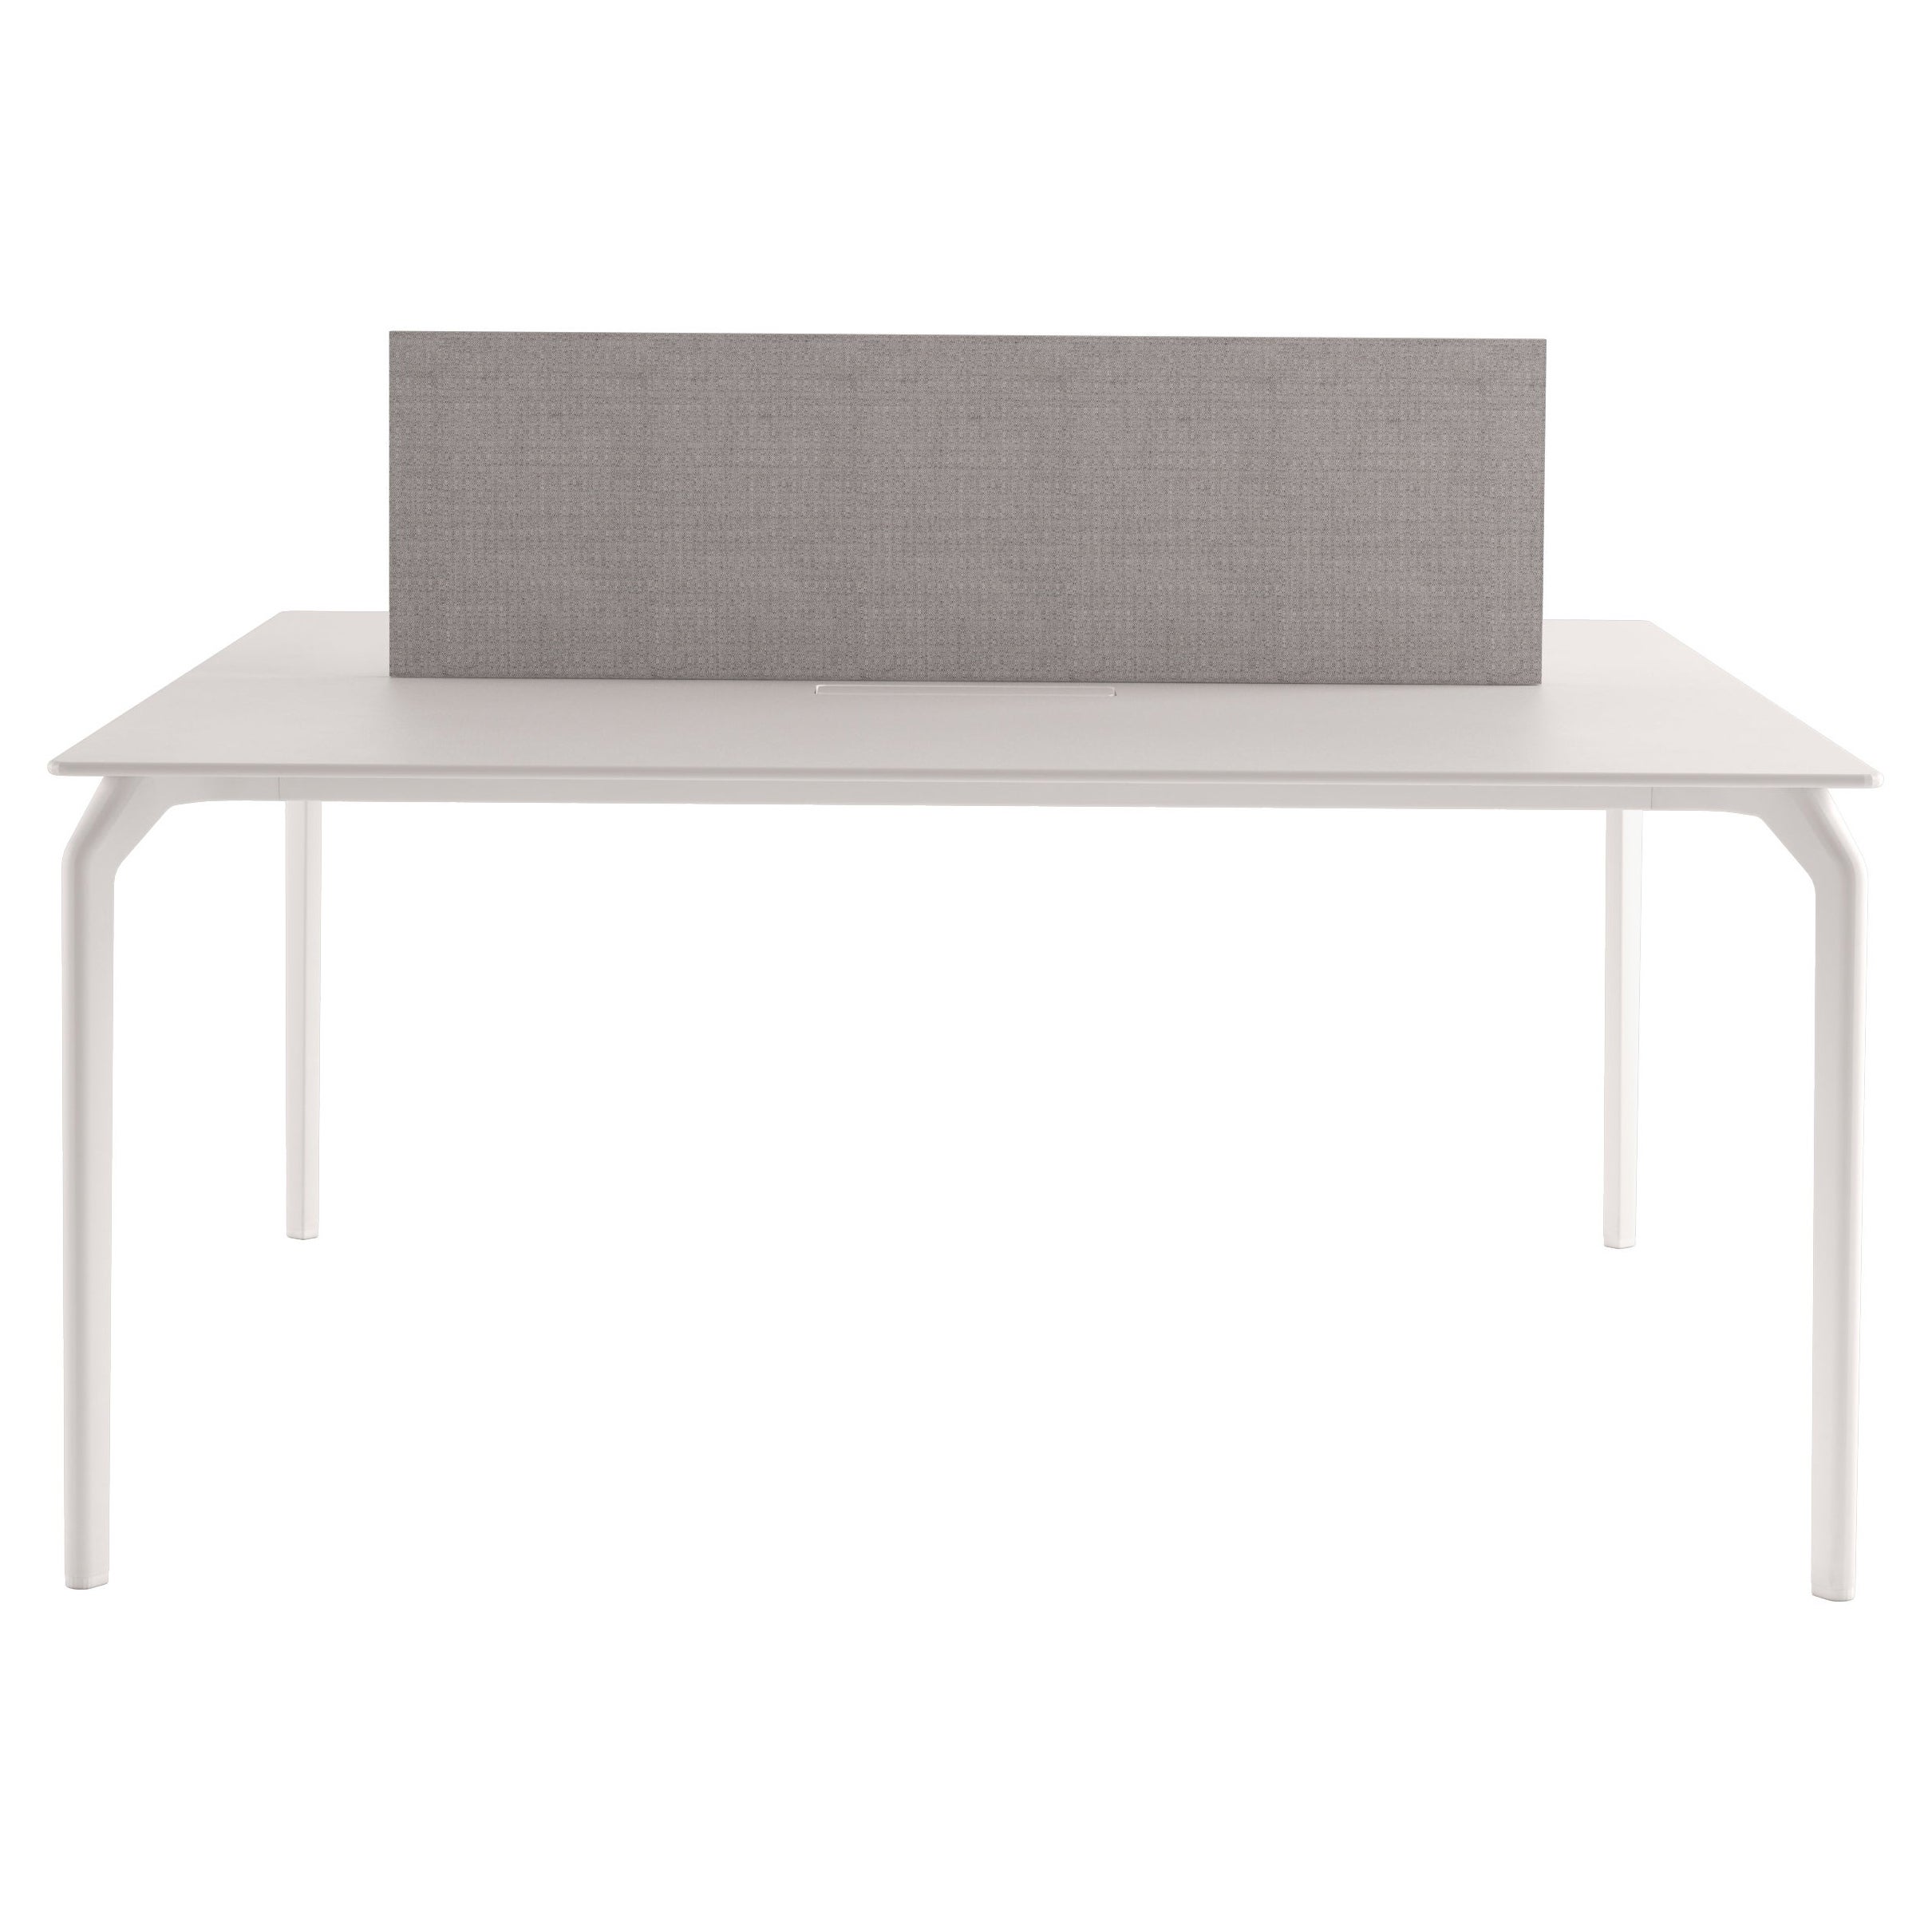 Alias 641 TEC Cable Table in White with Lacquered Aluminum Frame For Sale